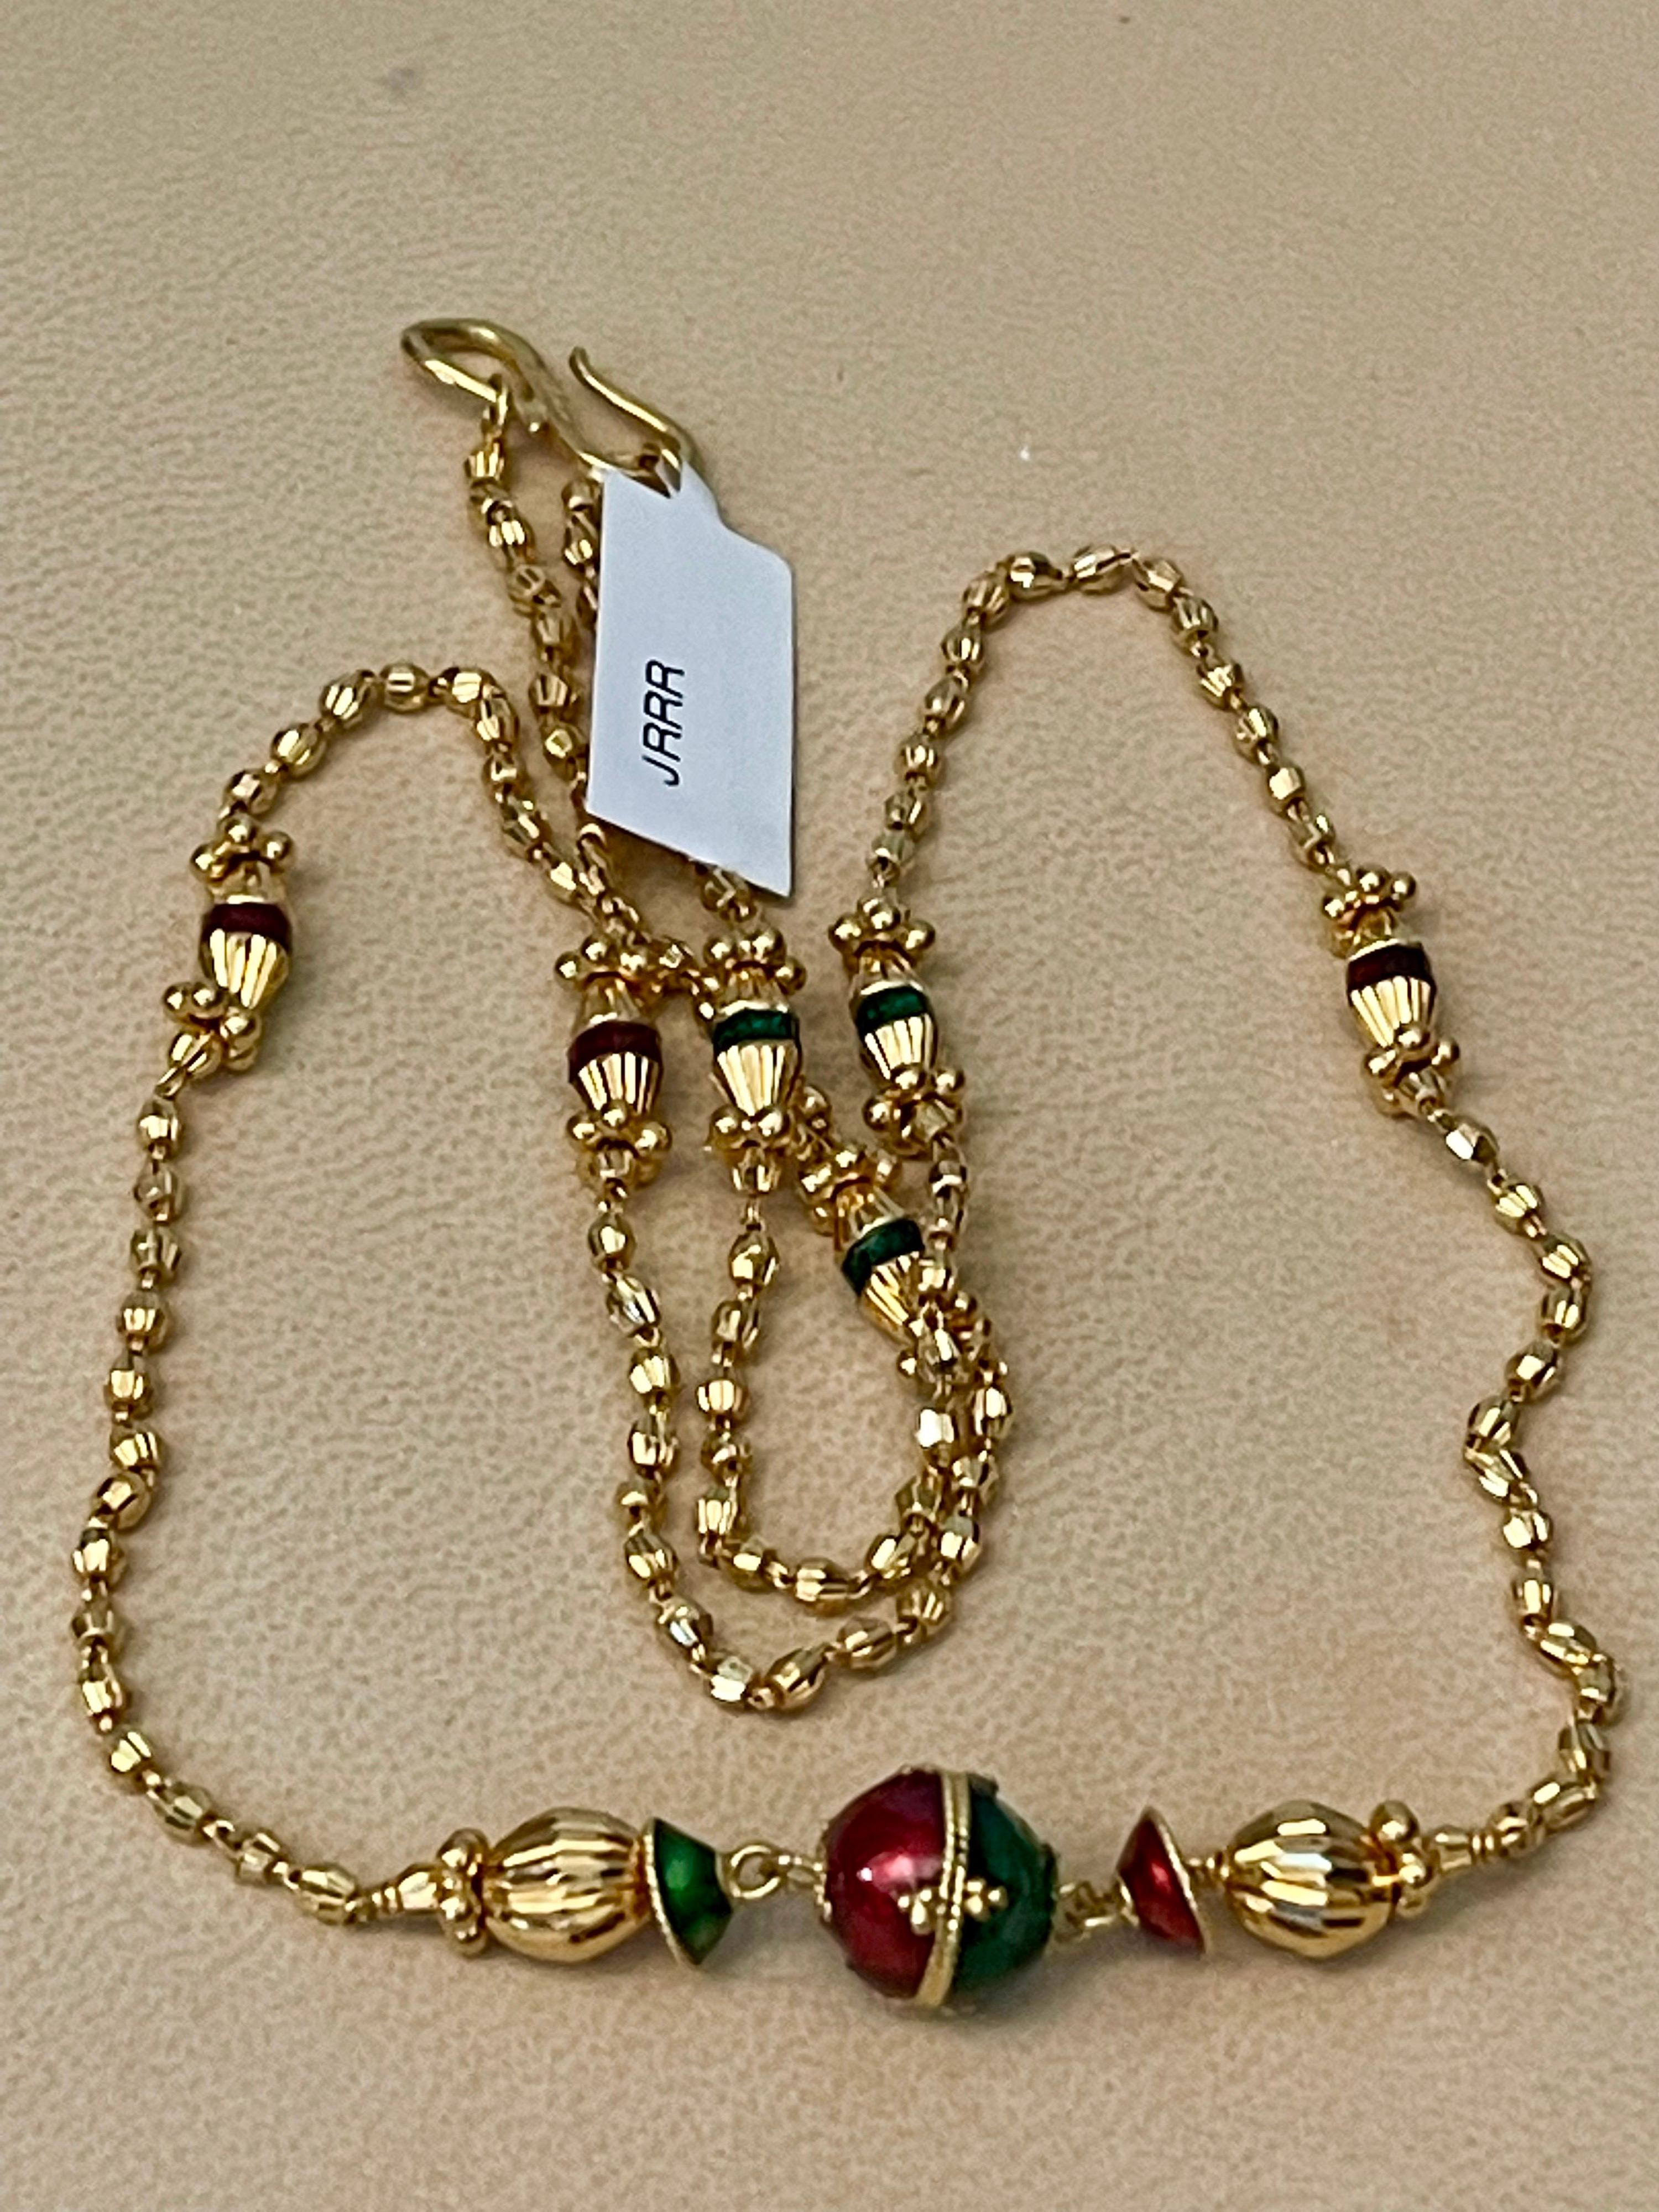 Vintage 22 Karat Yellow Gold 18 Gm with Red & Green Enamel Necklace 2